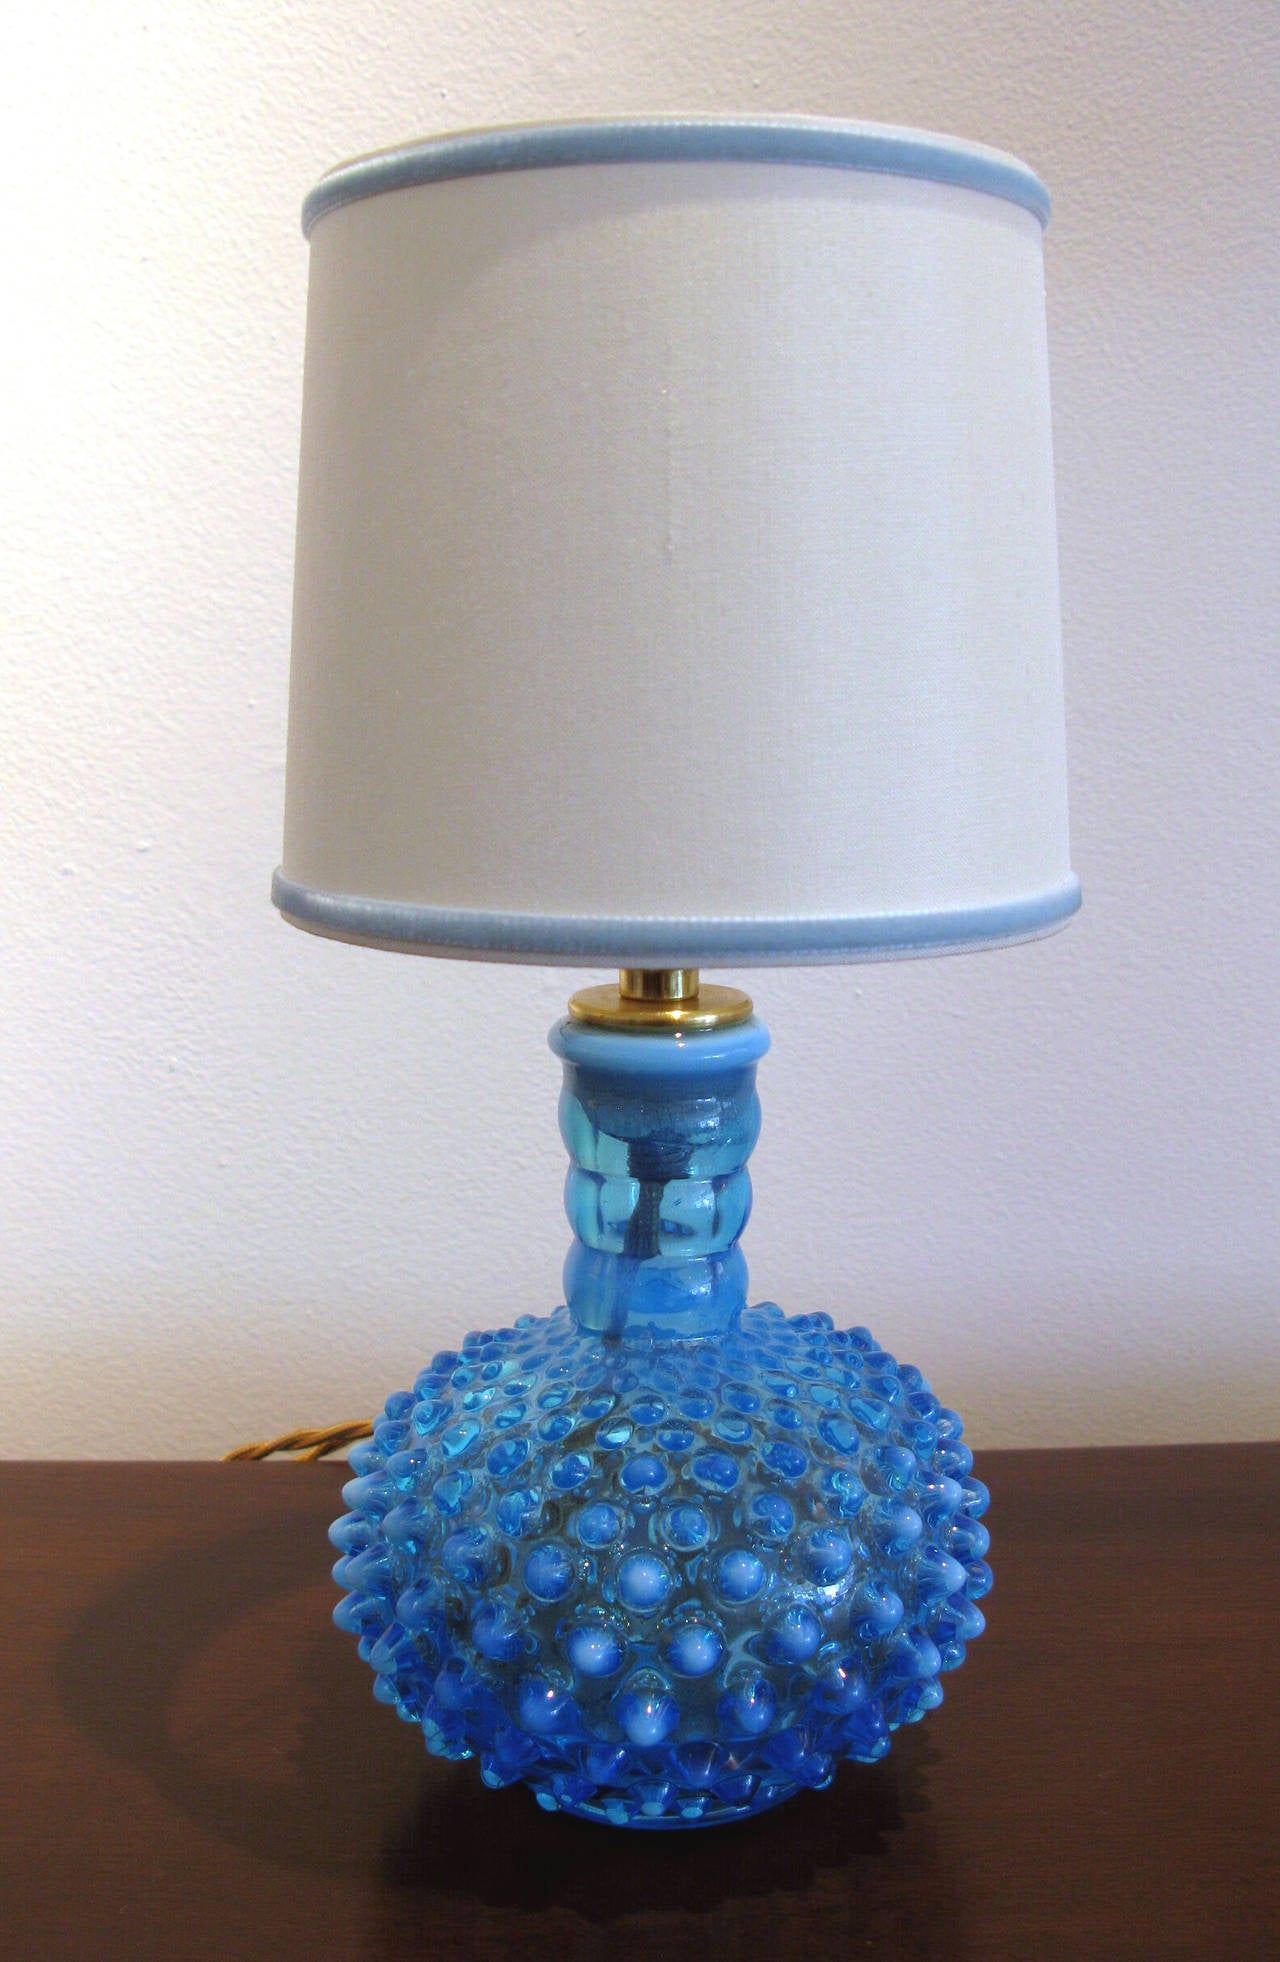 Pair of petite aqua blue and white opalescent hobnail glass lamps. Designed and produced by Fenton Art Glass. New silk shades with baby blue velvet trim. Gold cord and brass sockets. Dimensions shown include shades.